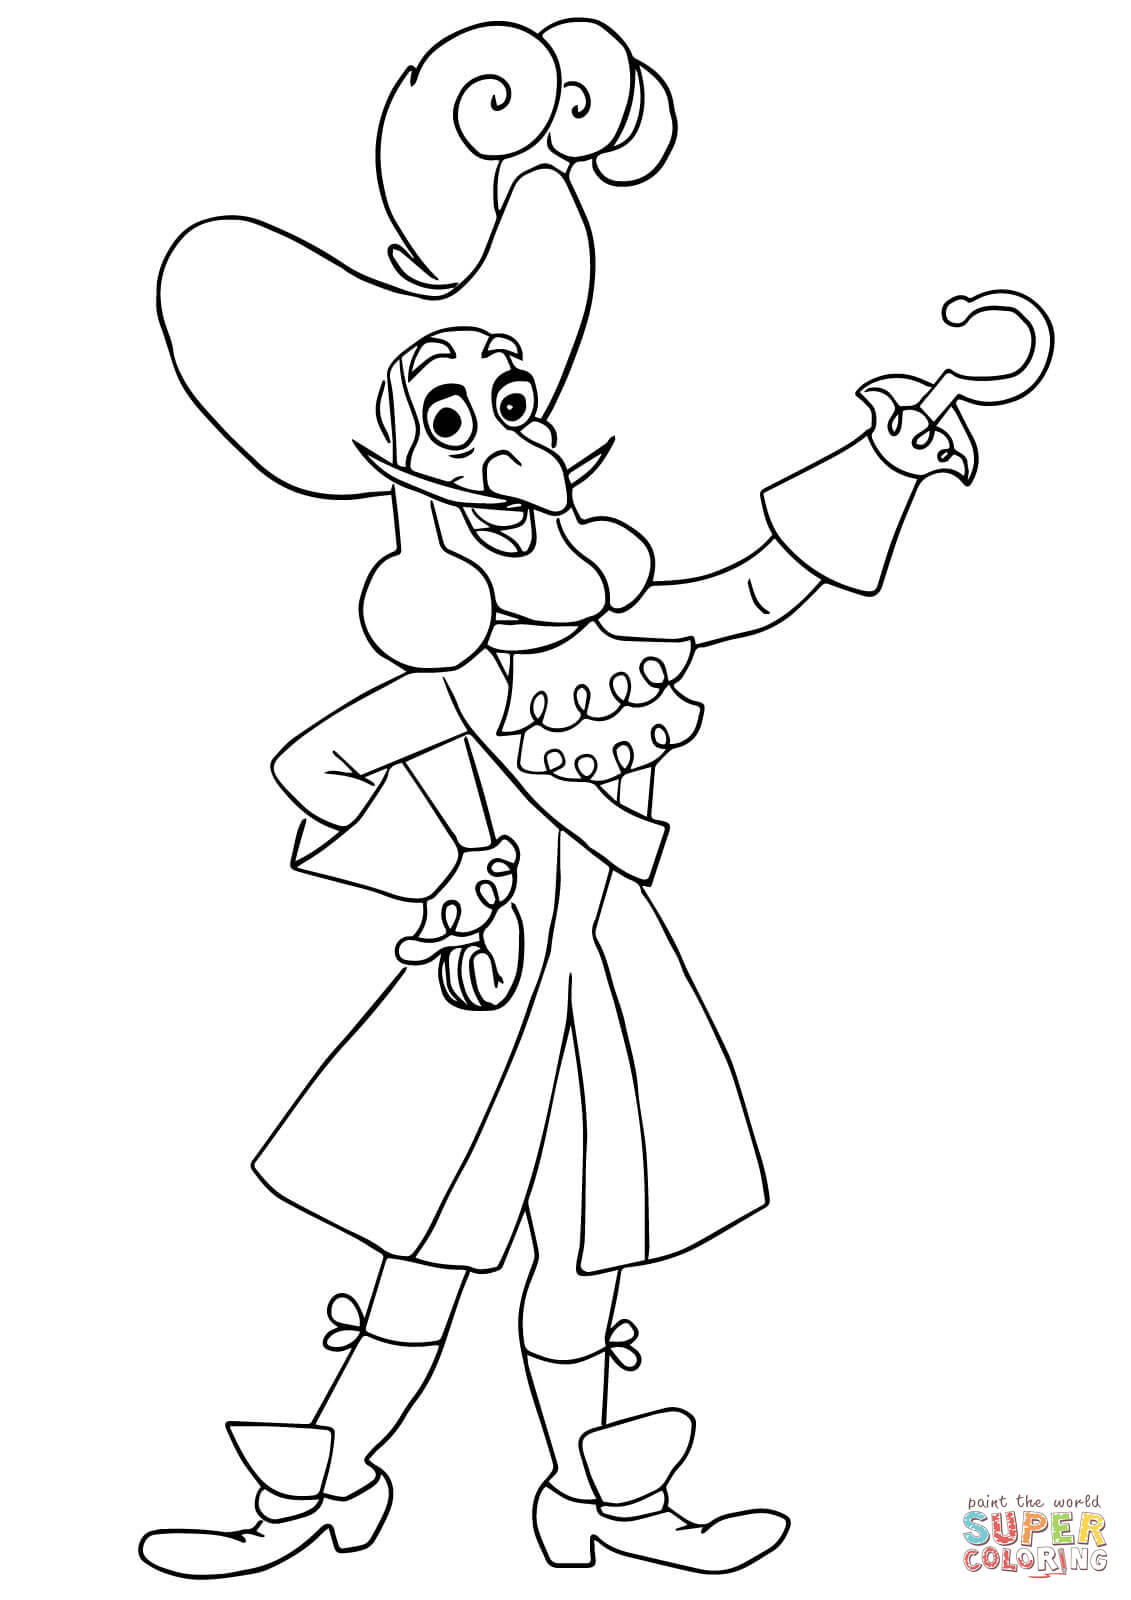 Captain Hook coloring page | Free Printable Coloring Pages